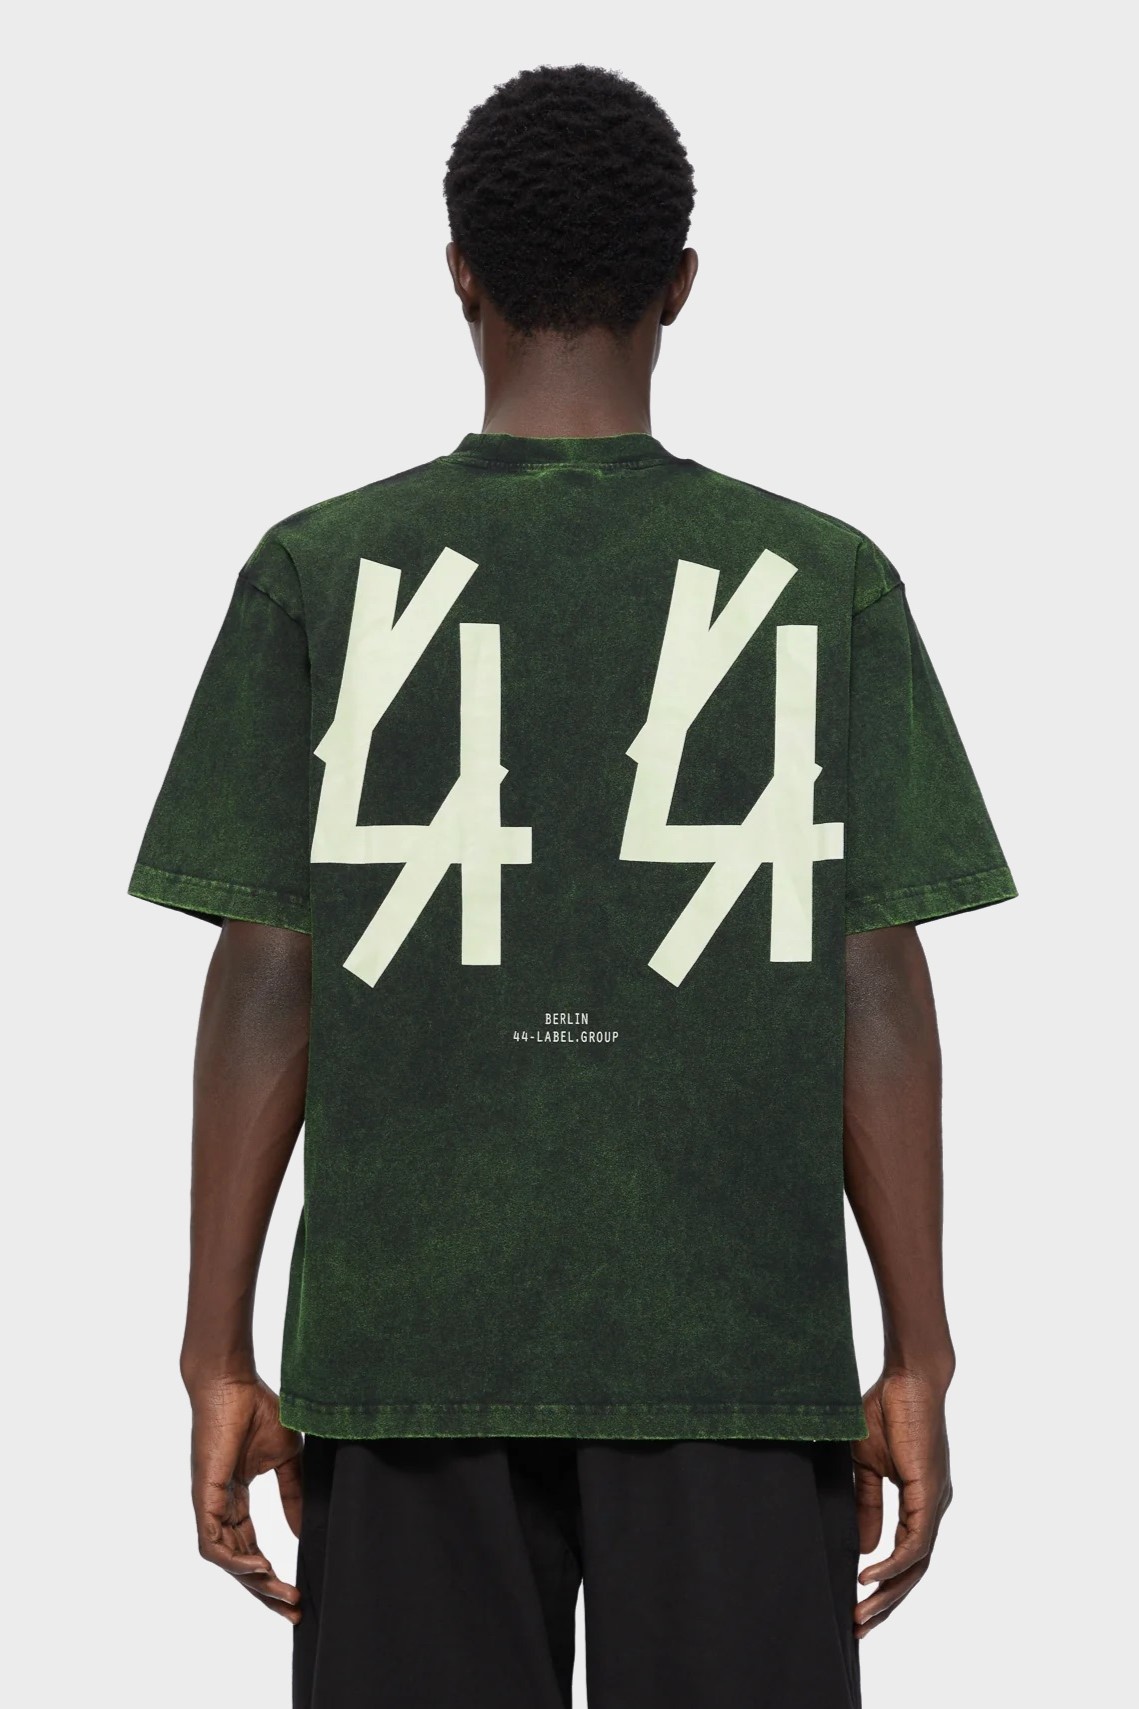 44 LABEL GROUP Overdied Solar Tee in Green